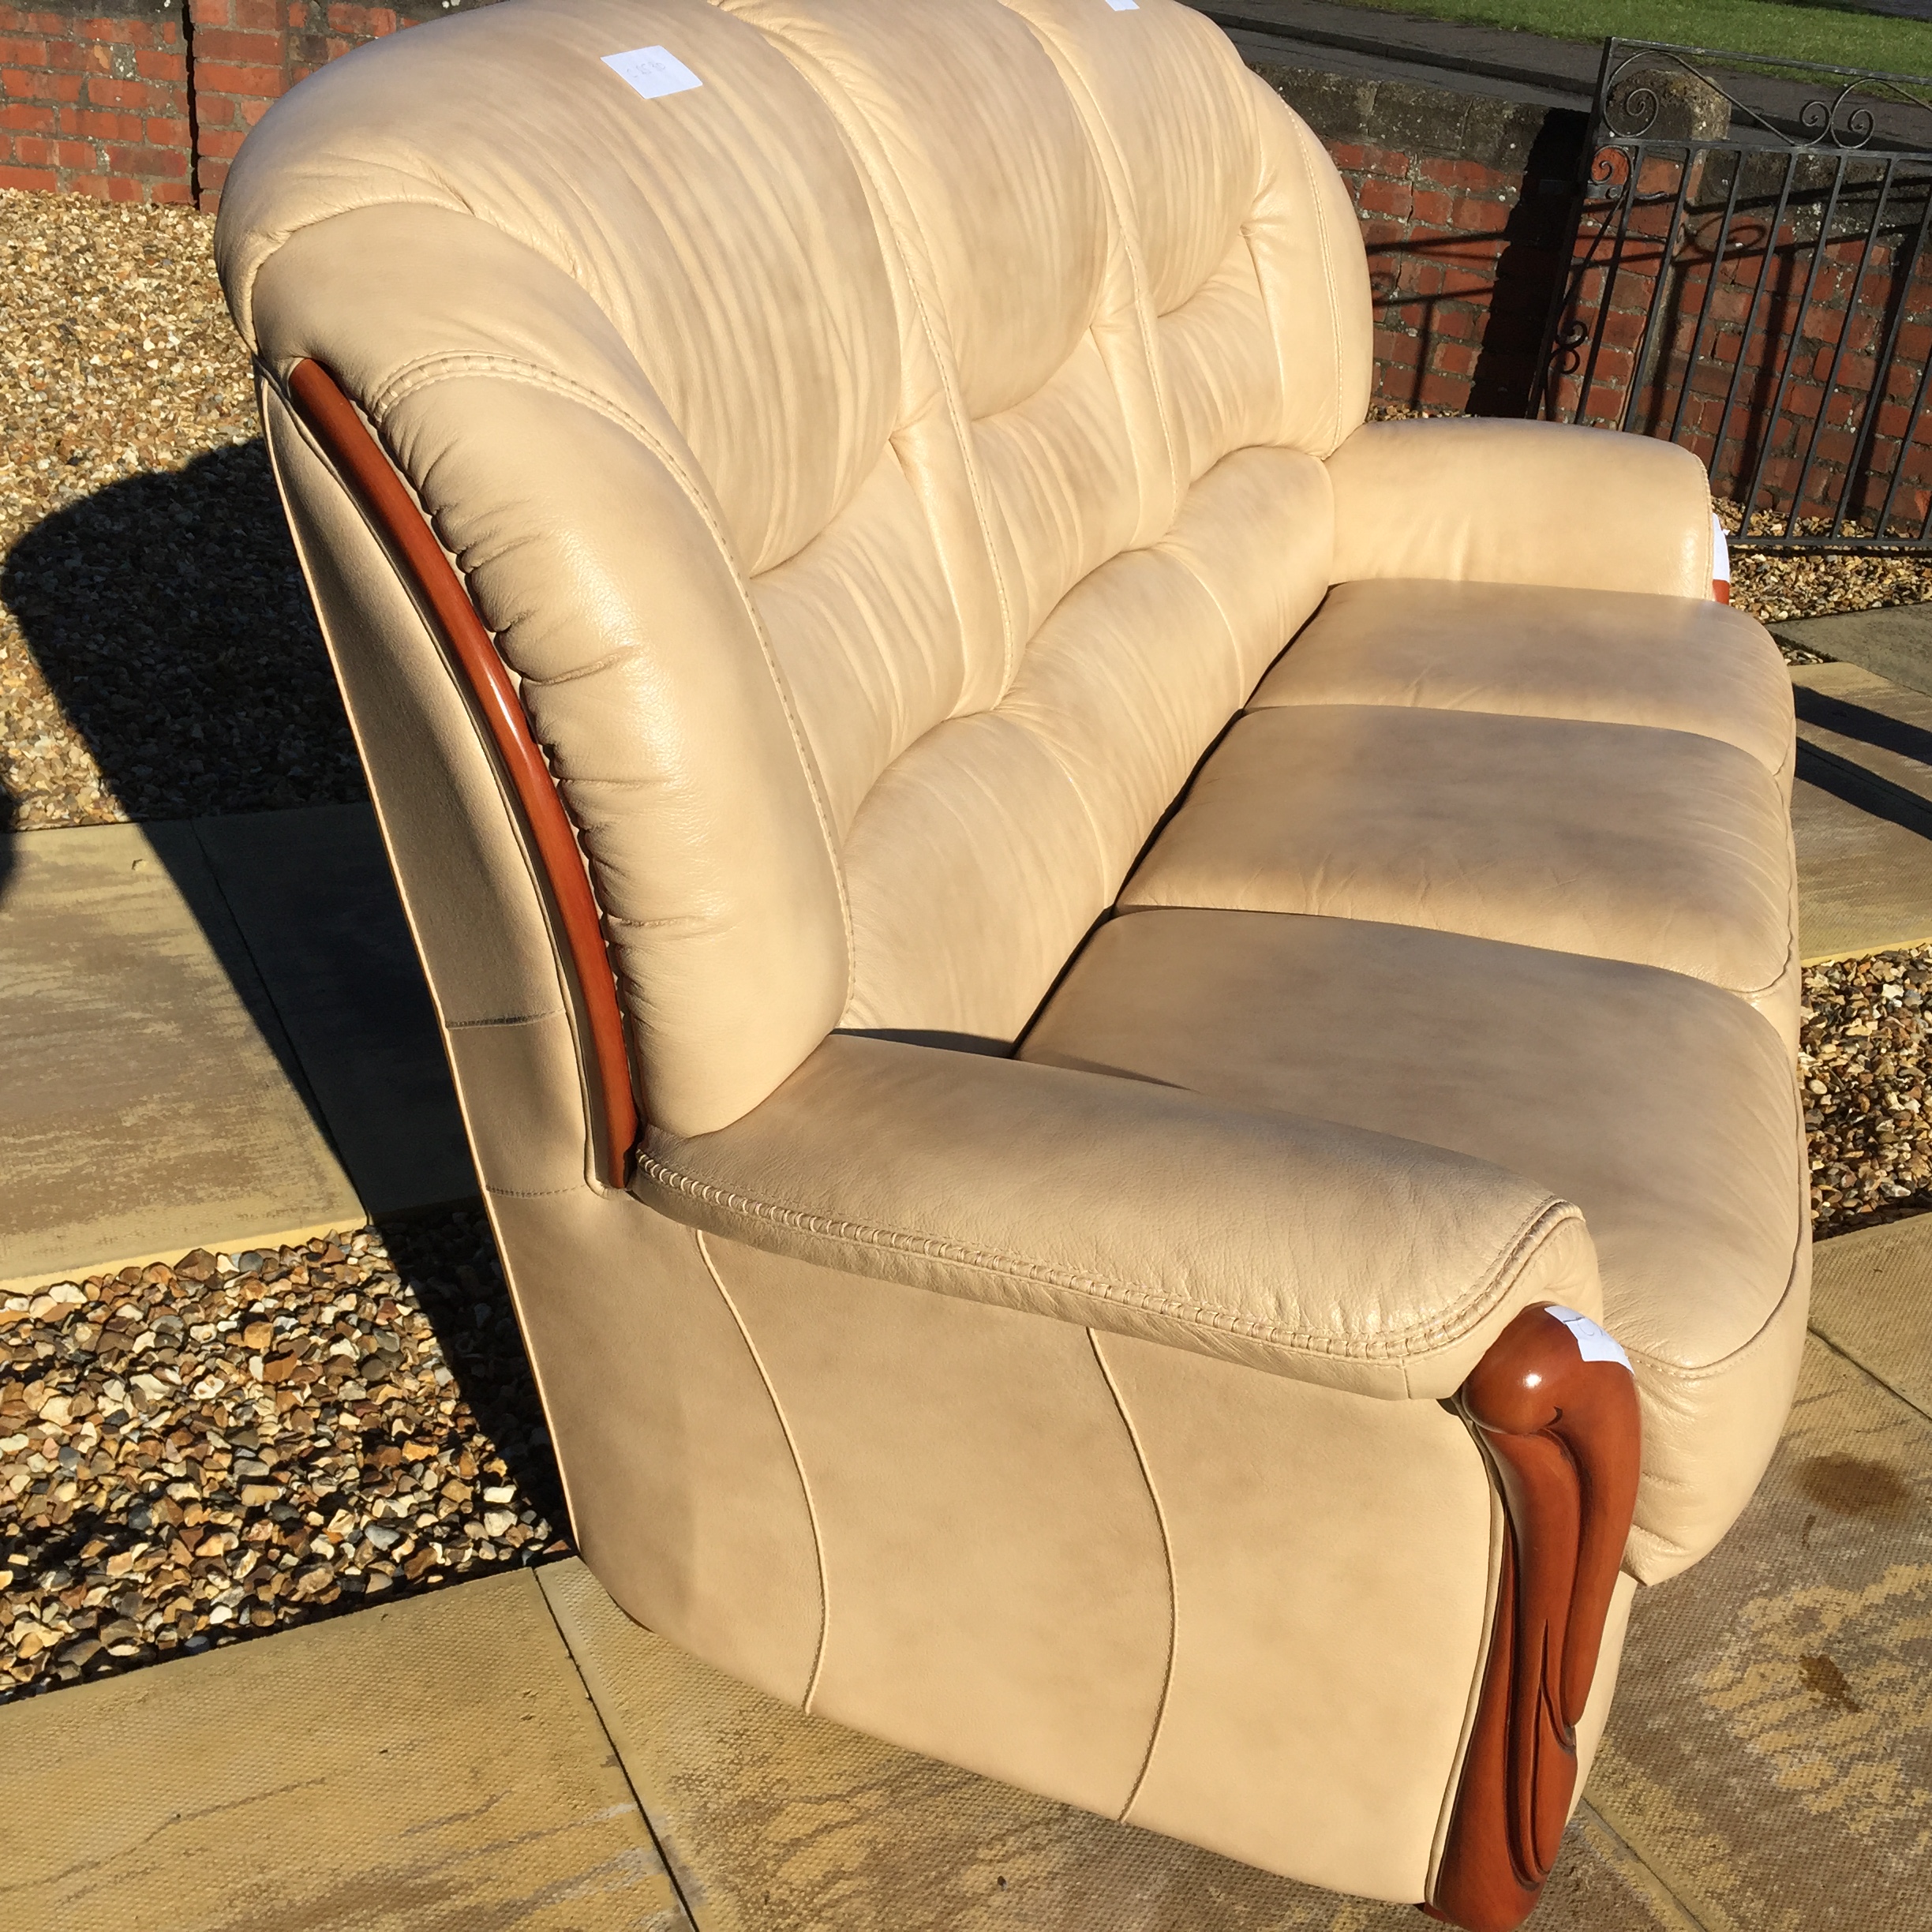 A brown leather sofa in excellent condition. - Image 2 of 2